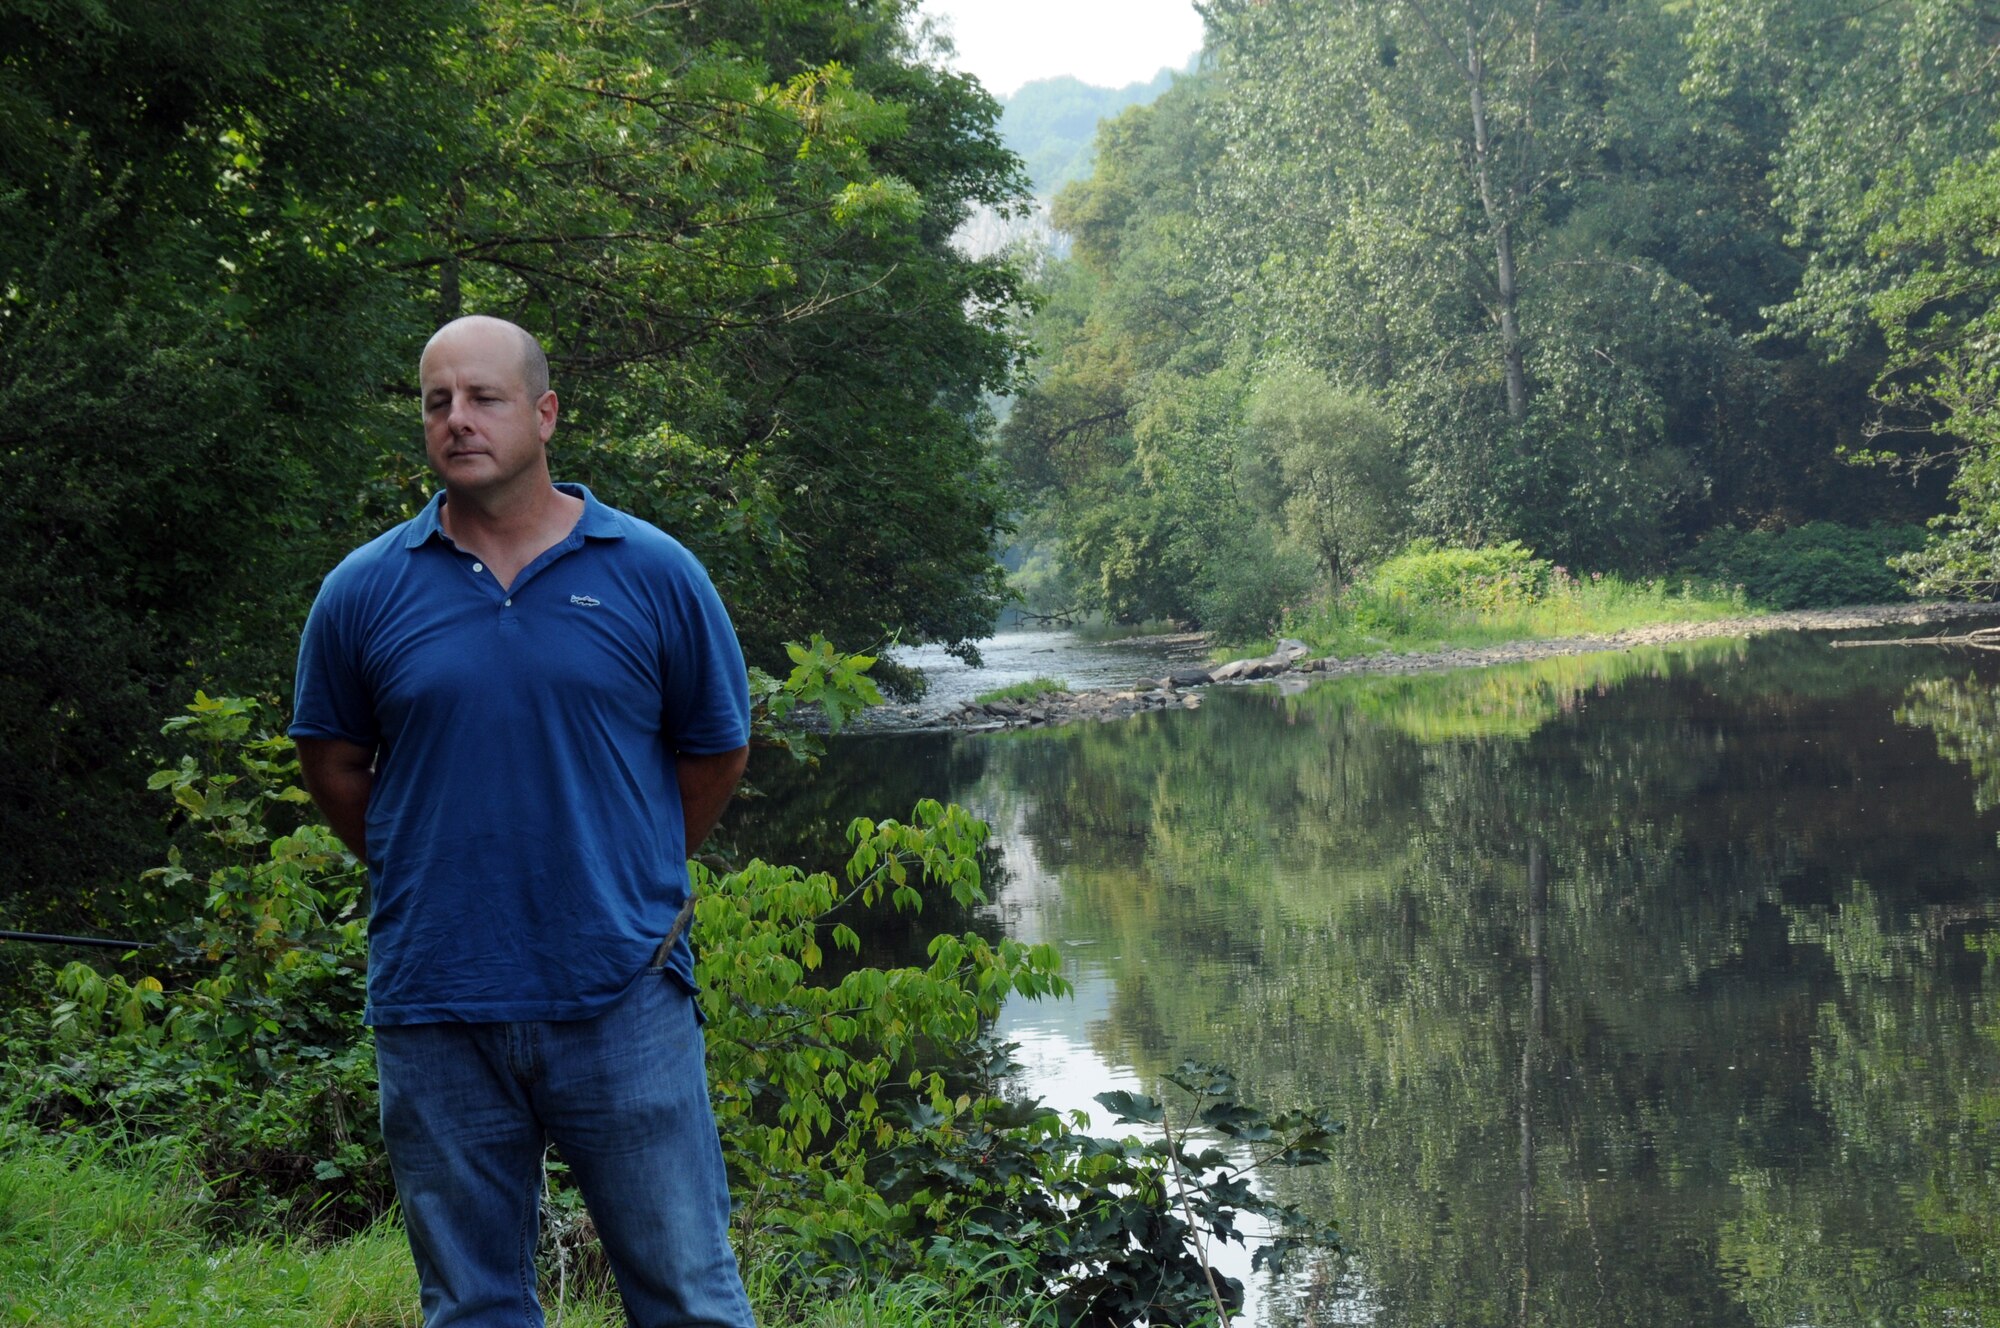 A picture of U.S. Air Force Chief Master Sgt. James McCloskey stands along the banks of the Ambleve River near Aywaille, Belgium.